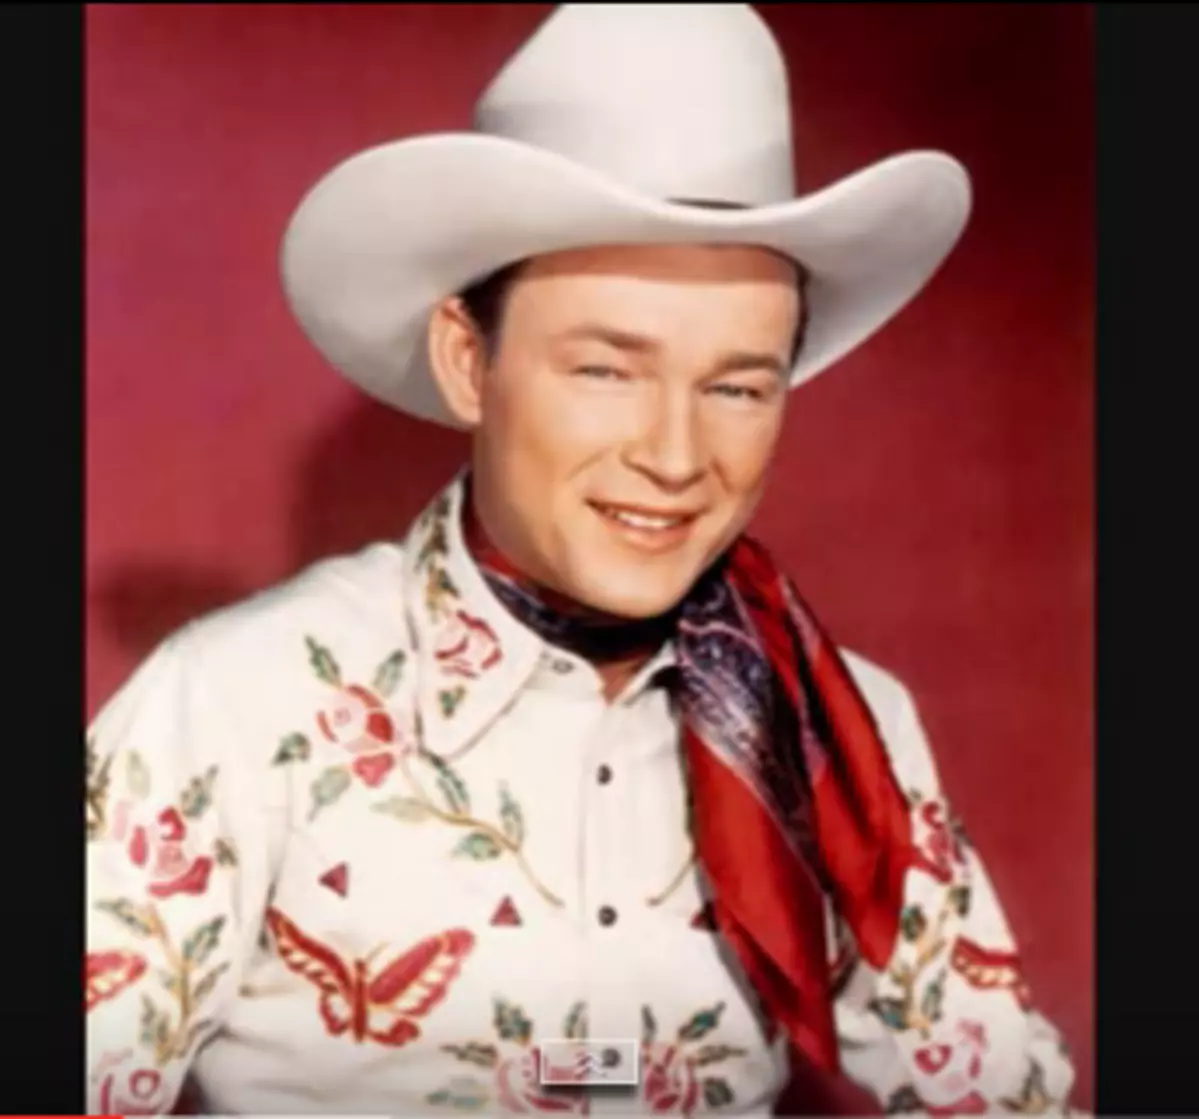 Our Hero Roy Rogers Was Born on This Day